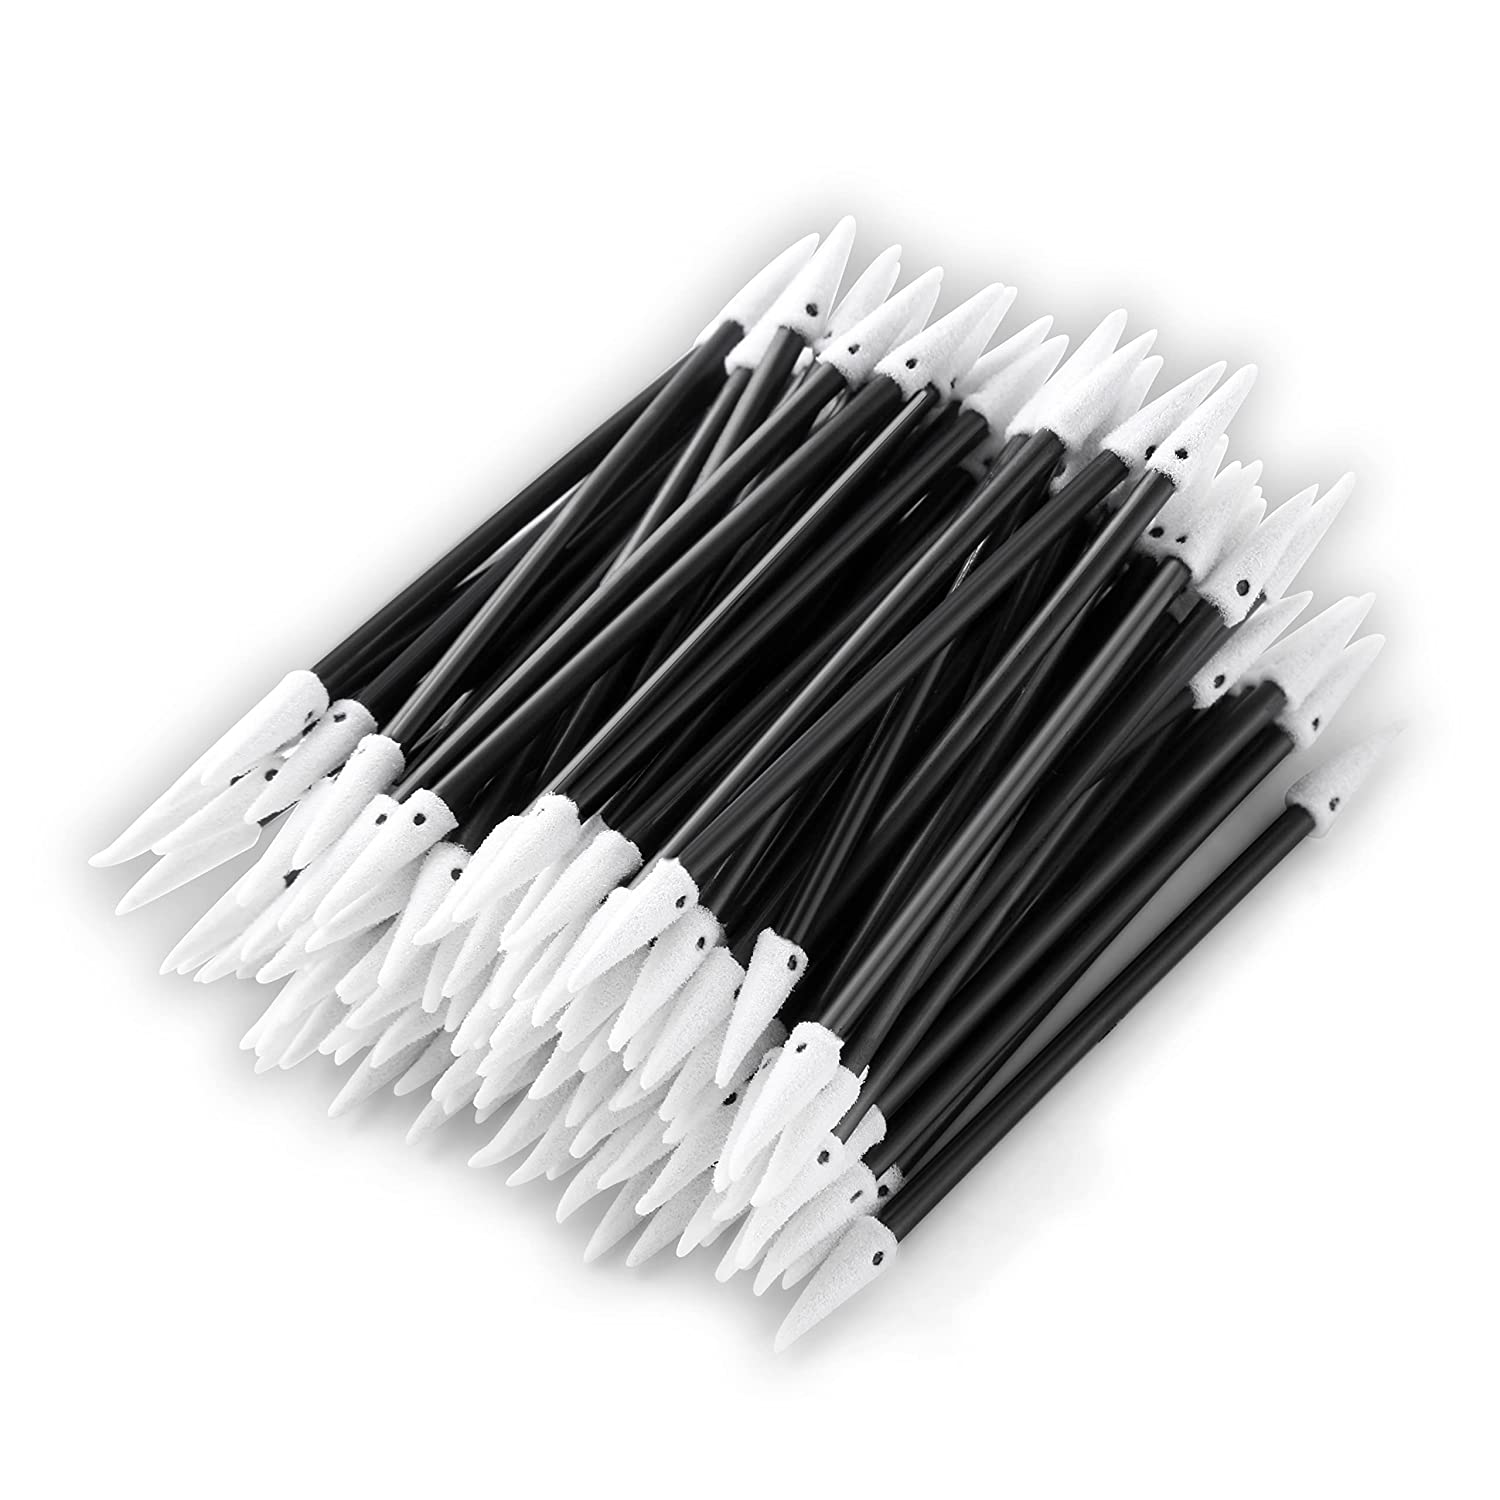 Double-Tipped Cleaning Swabs 2.9" (1,000pcs Black 3.2 mm Head, 73 mm Length), Foam Tips Swabs (No. D7230)